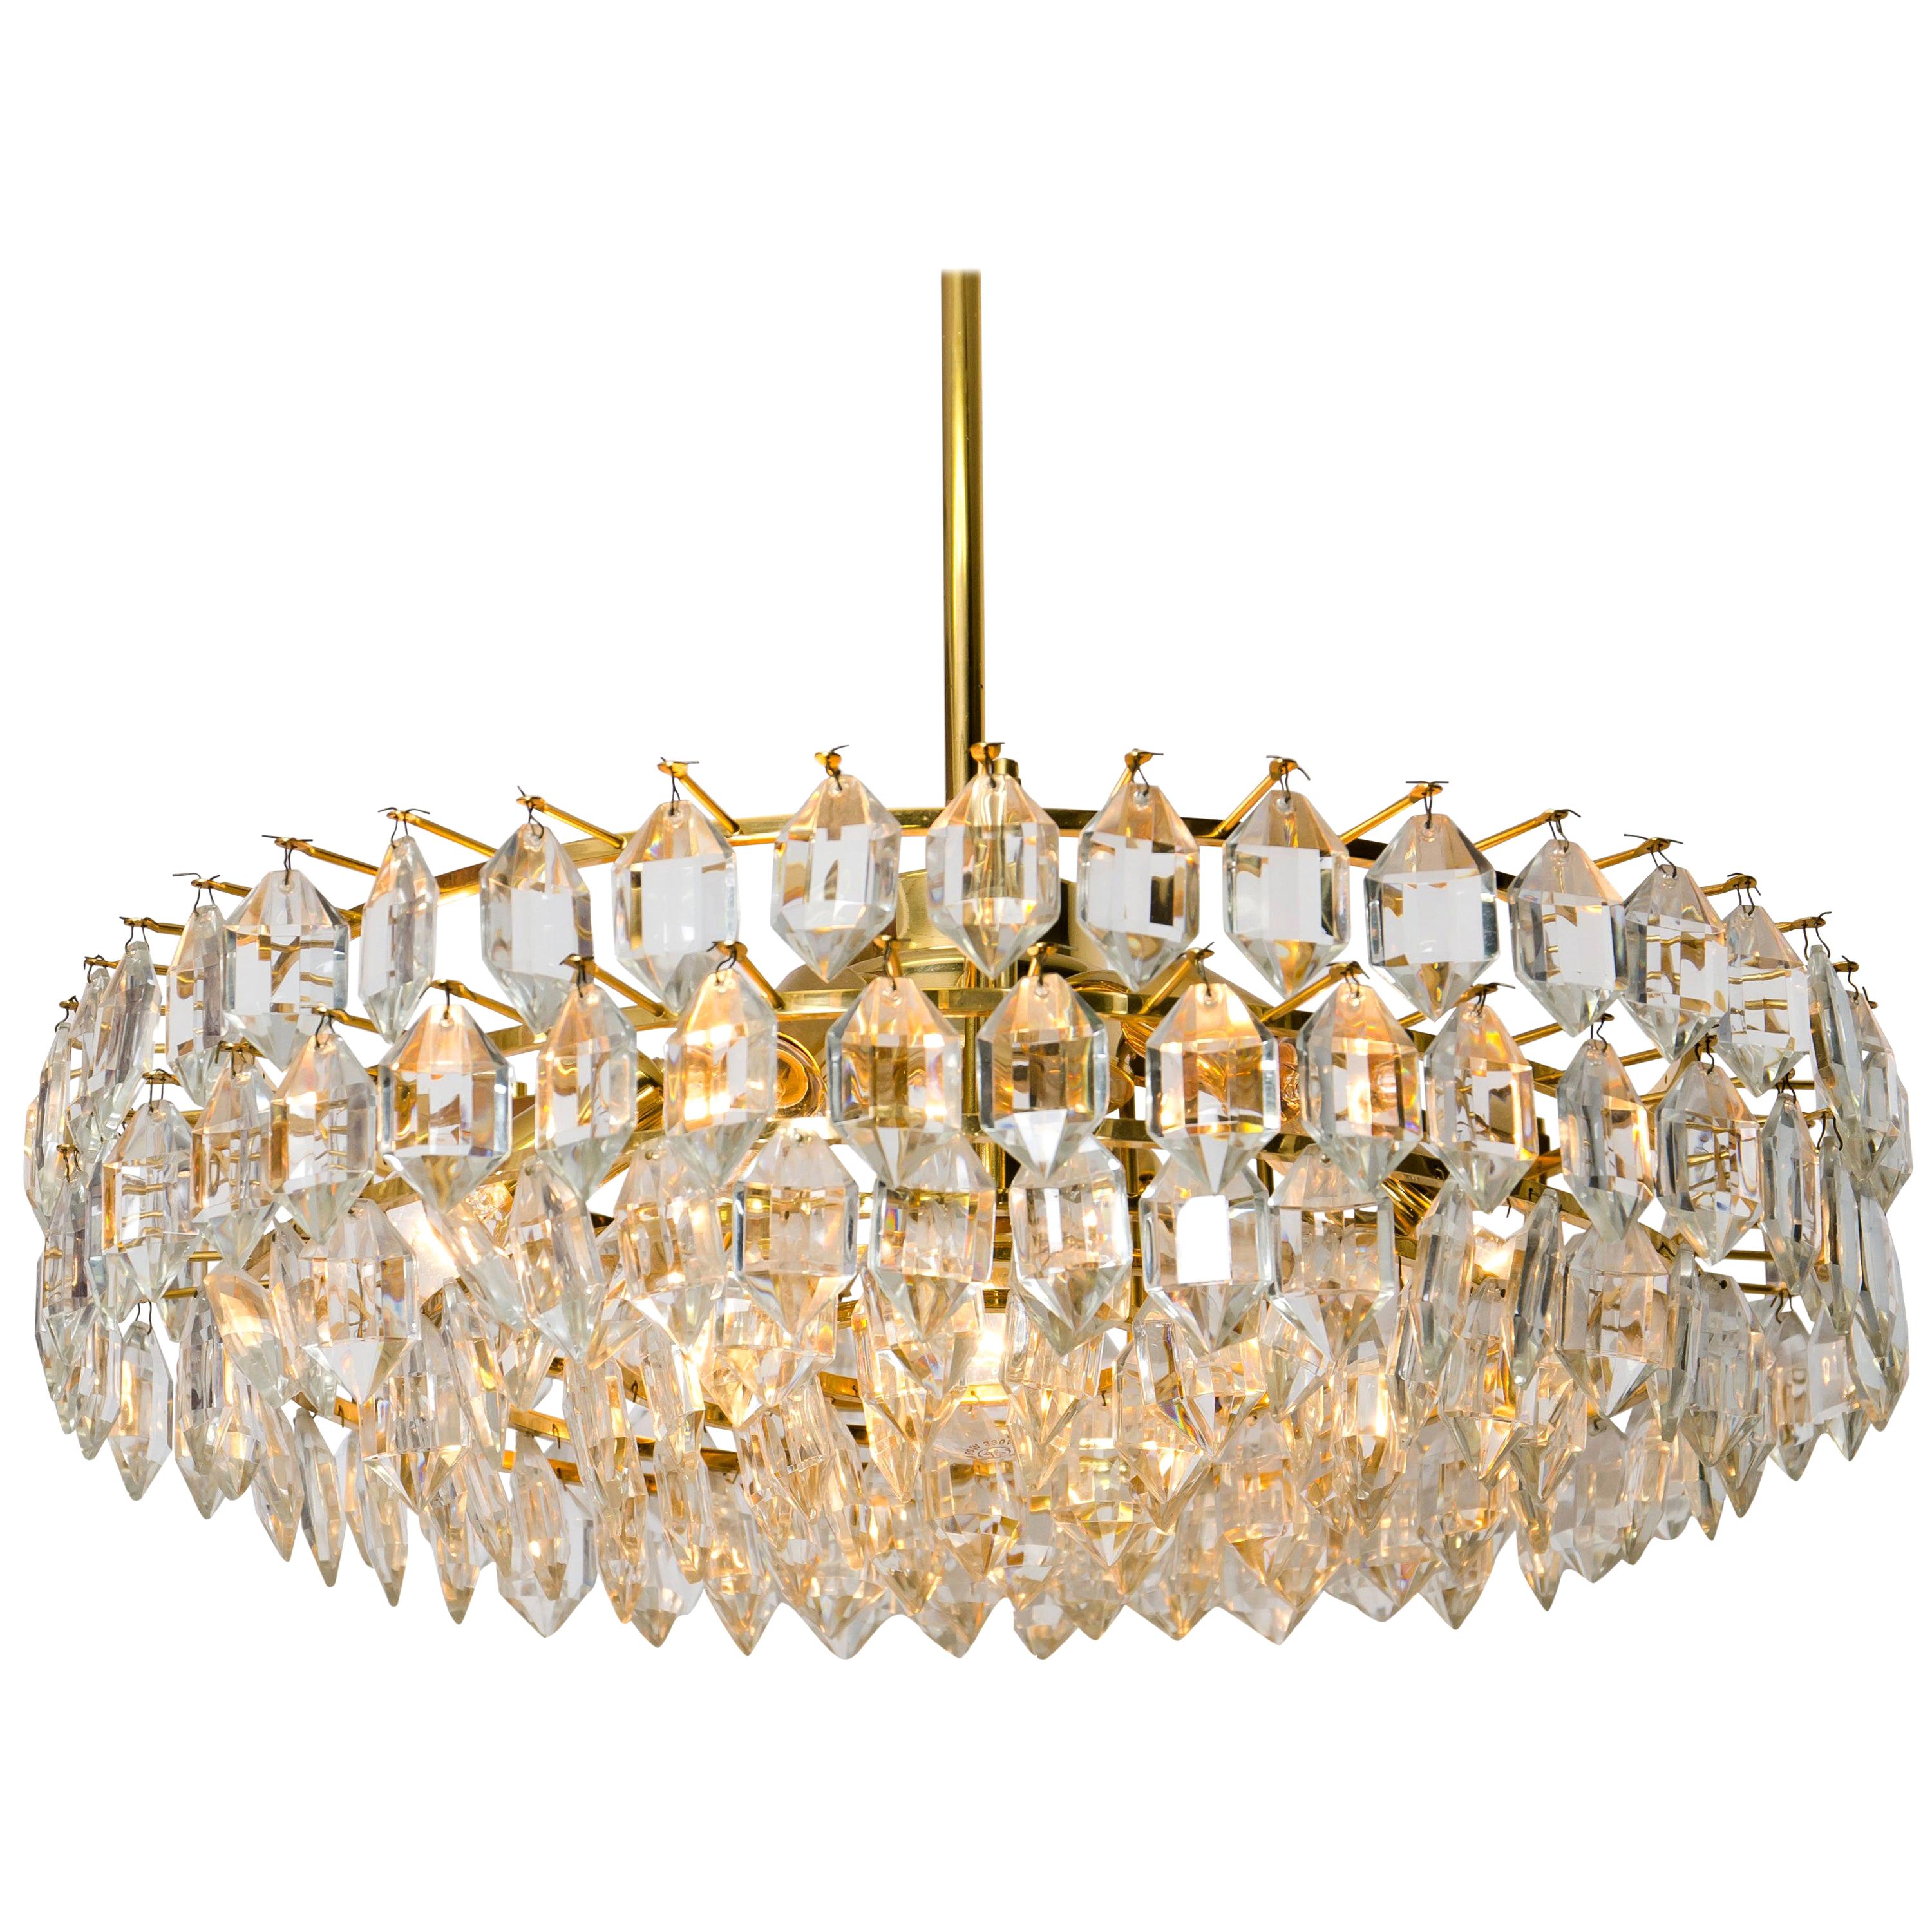 Bakalowis & Sons, Large Crystal Glass Chandelier, Vienna, Austria, 1950s For Sale